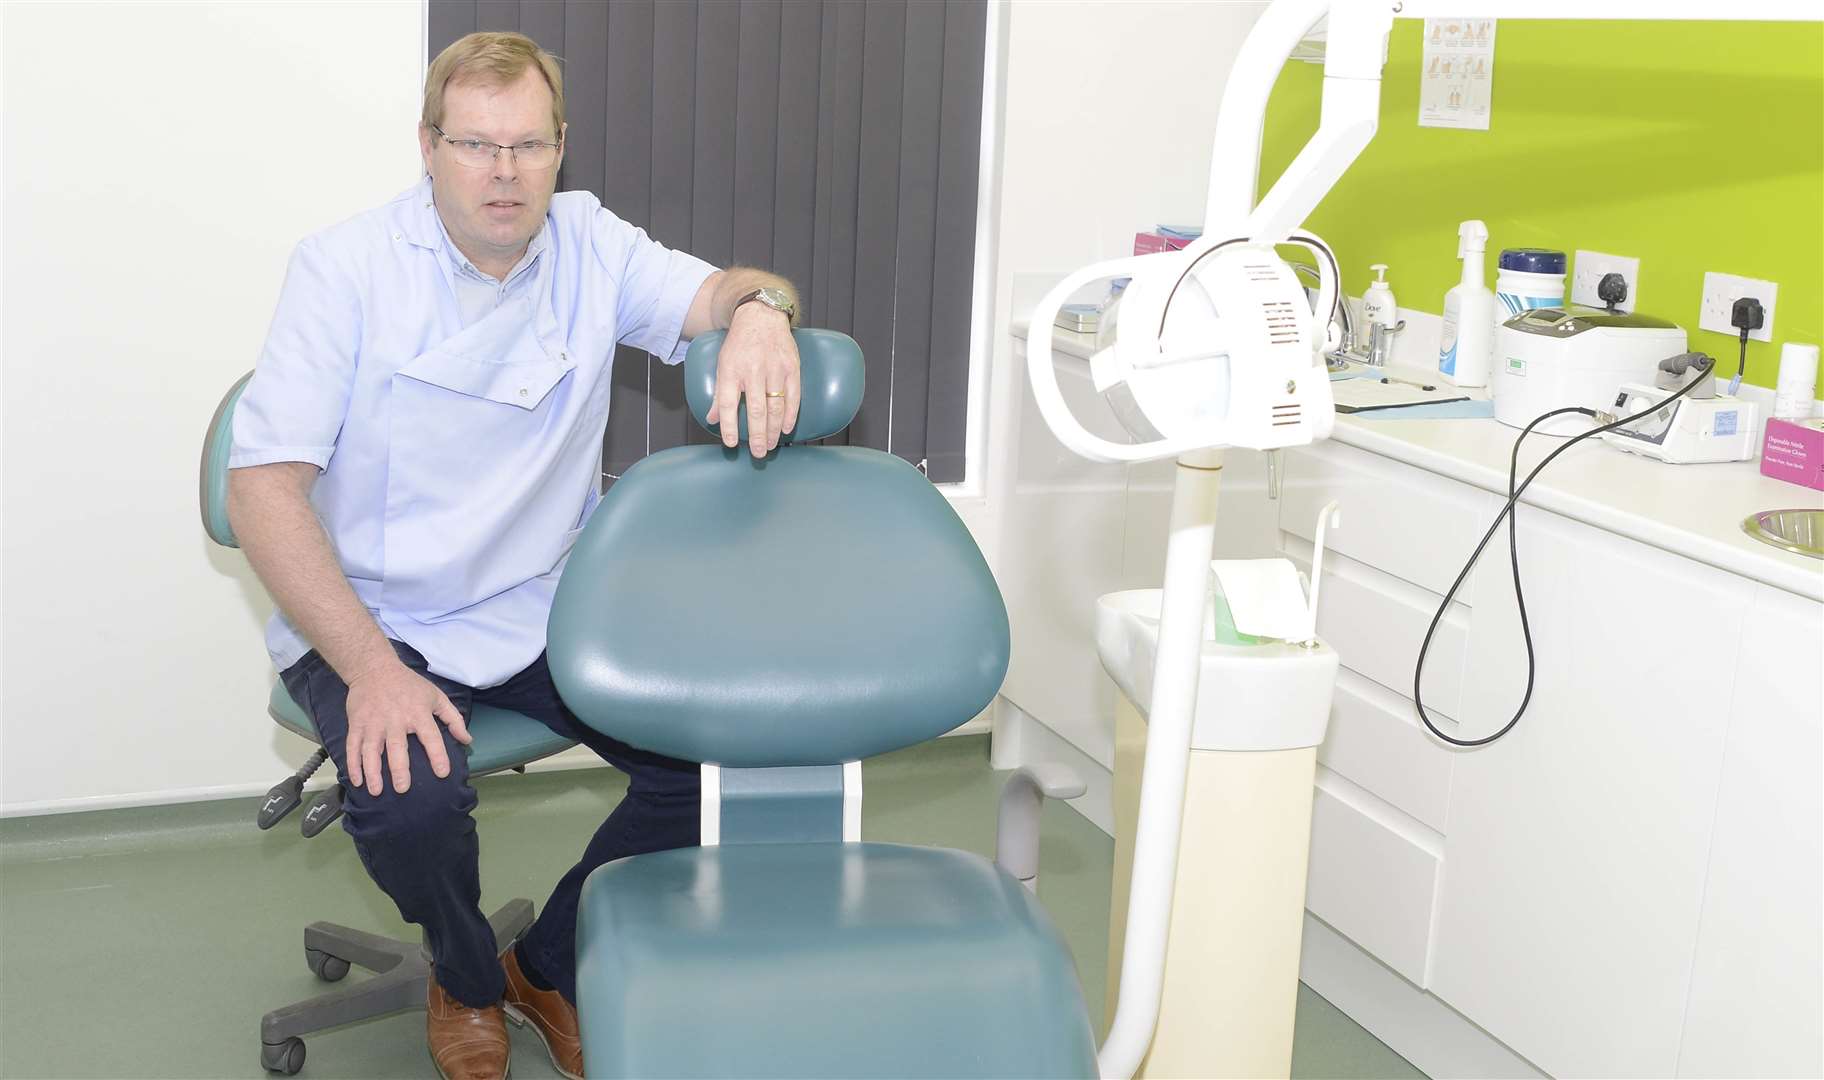 Clinical Denture Centre will deliver the care, treatment and professionalism you deserve. Picture: Paul Amos